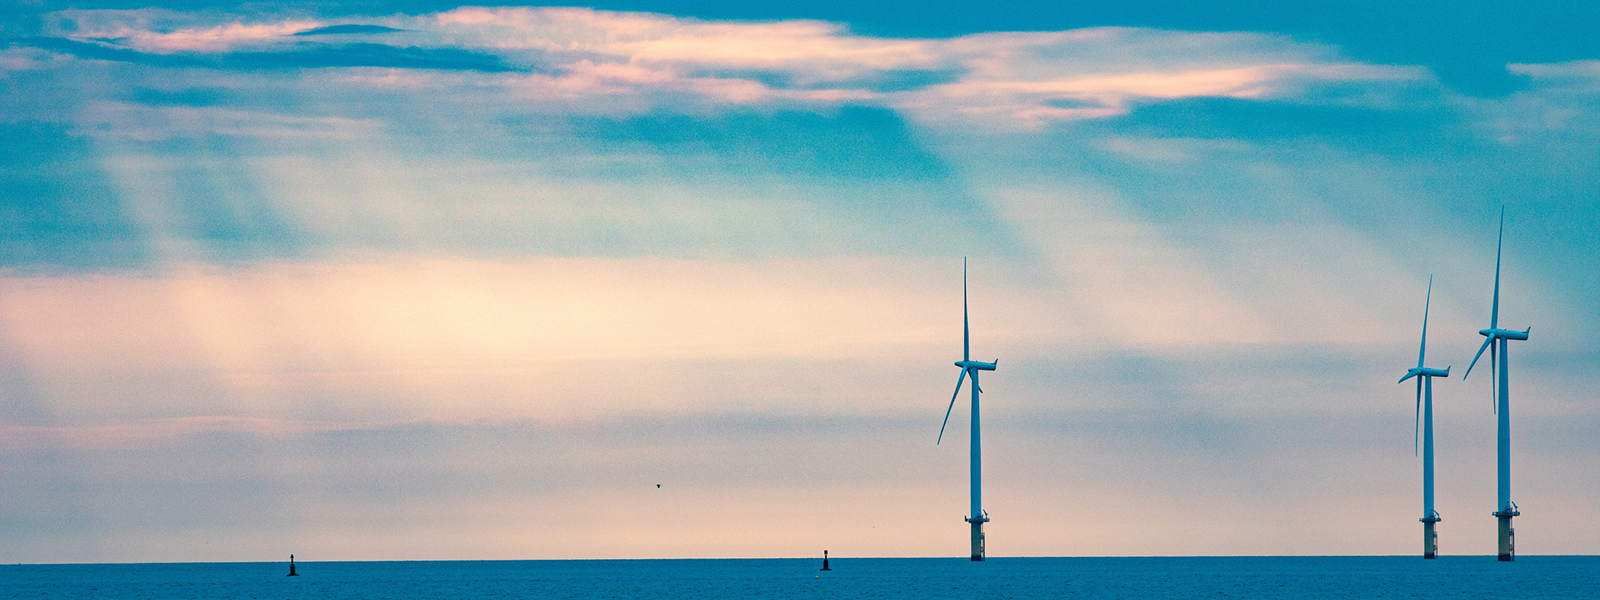 The sun shining through clouds over wind turbines at sea